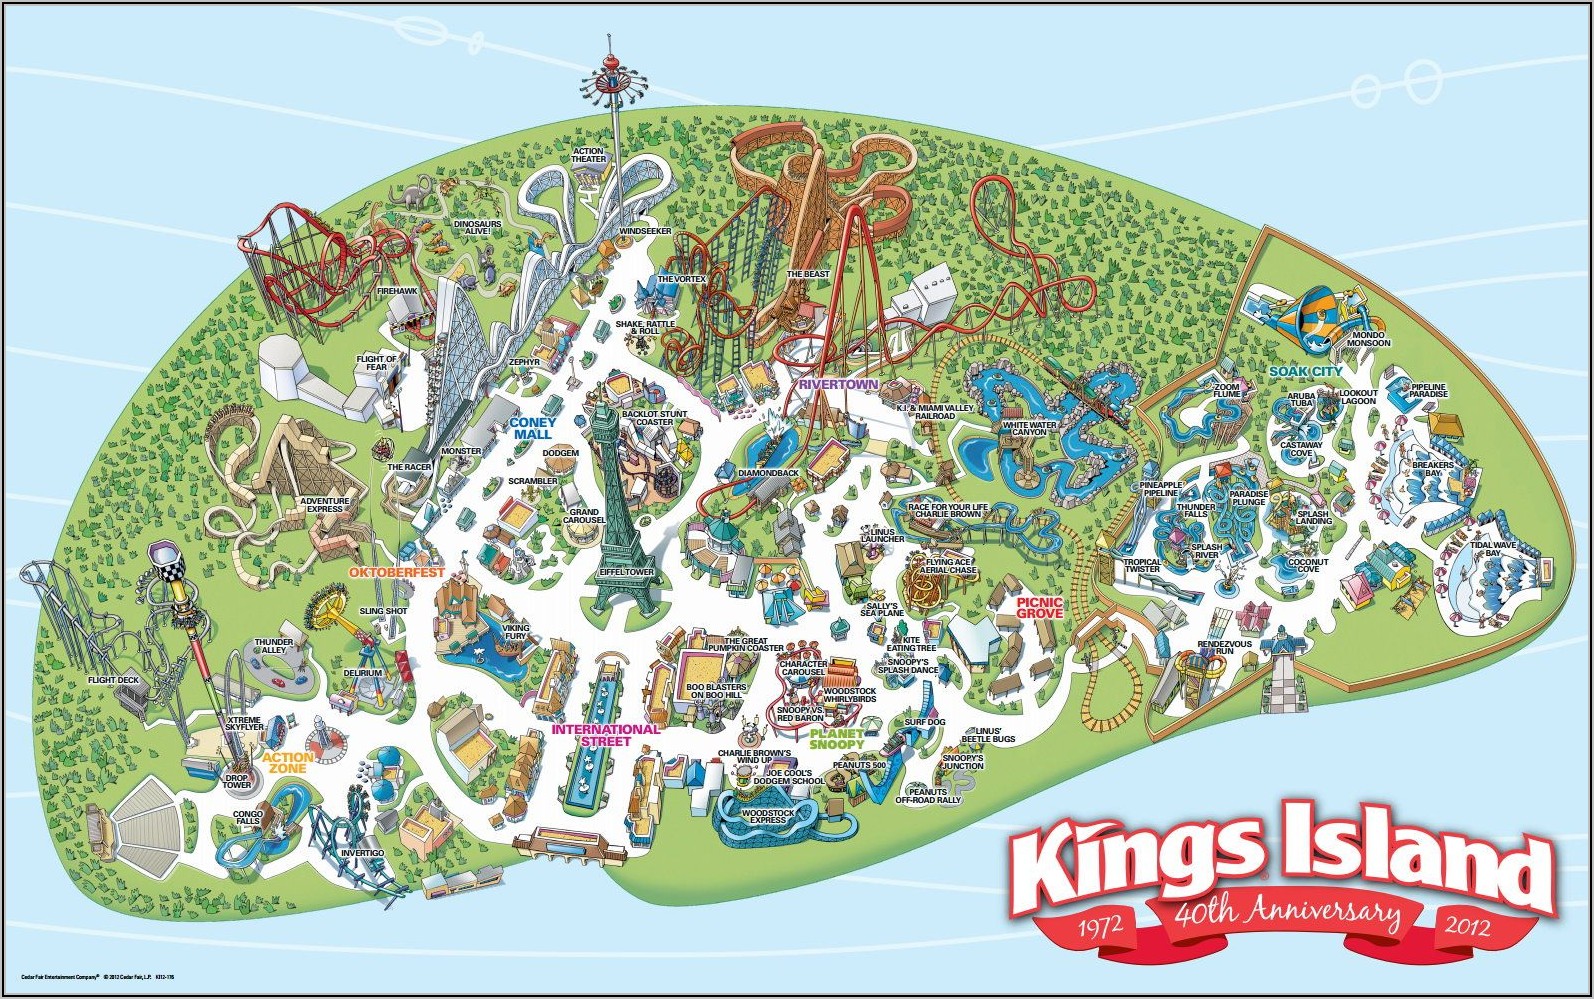 Kings Dominion Map 2018